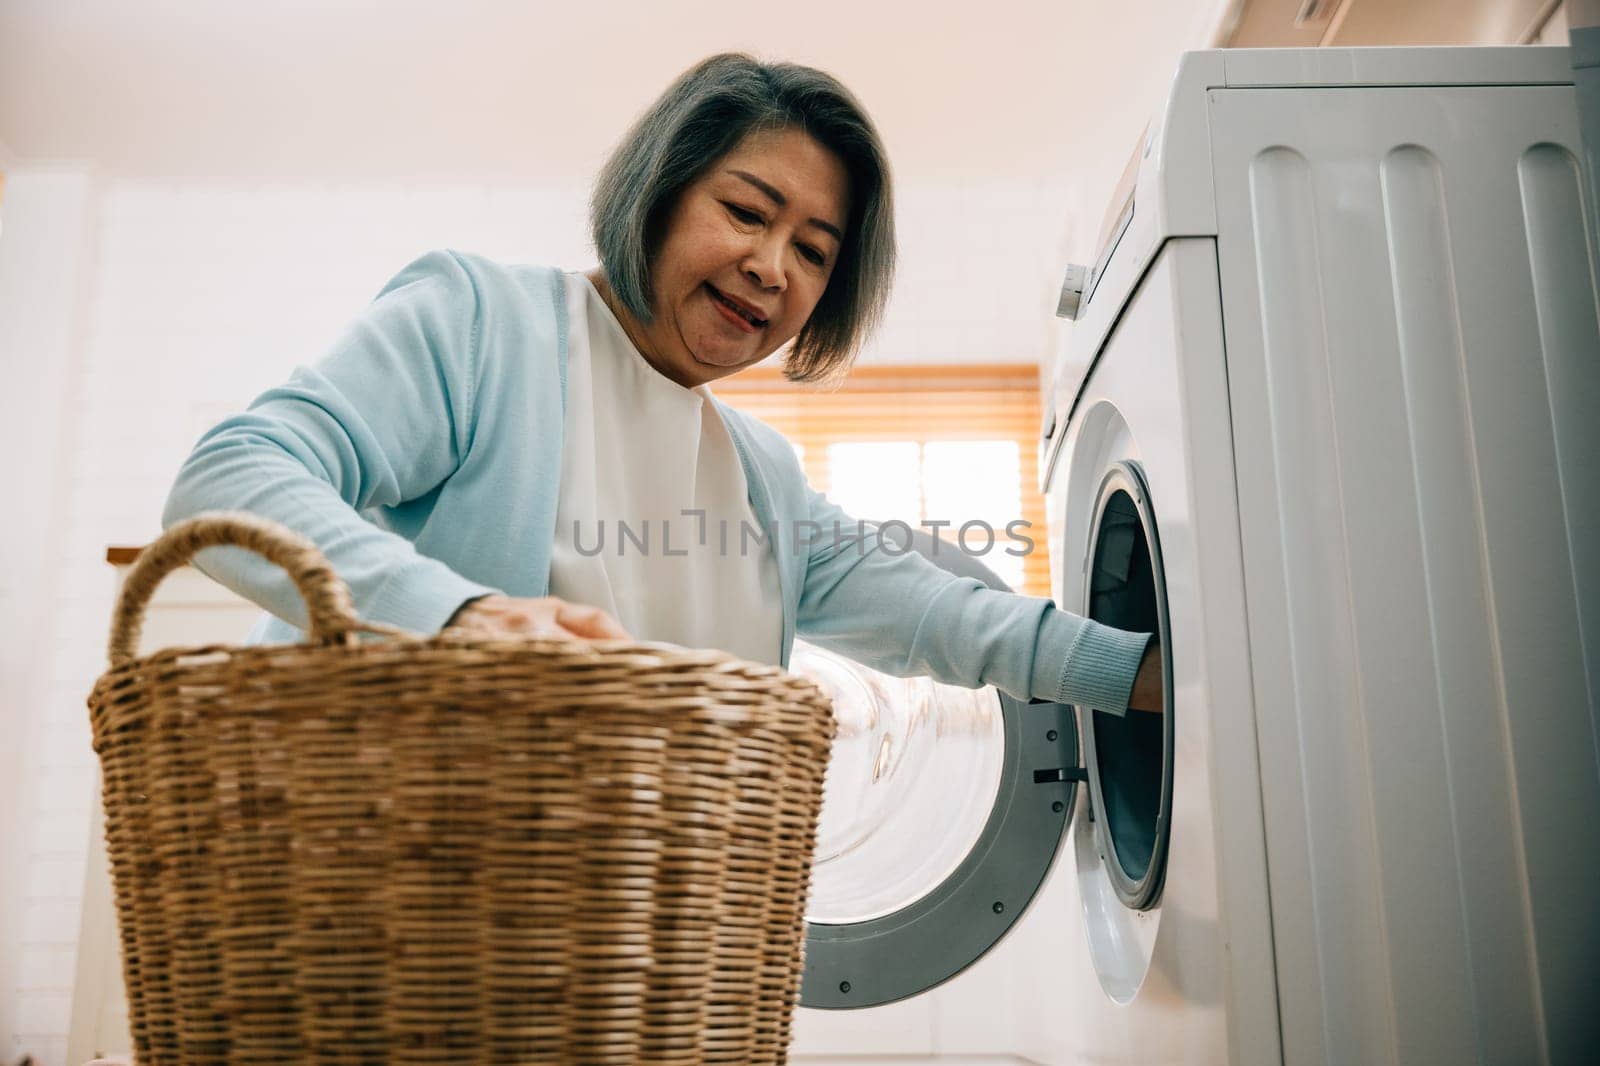 An old woman, a grandmother, loads laundry into the washing machine, smiling as she covers her routine. This portrait reflects a modern solution for family hygiene and happiness.